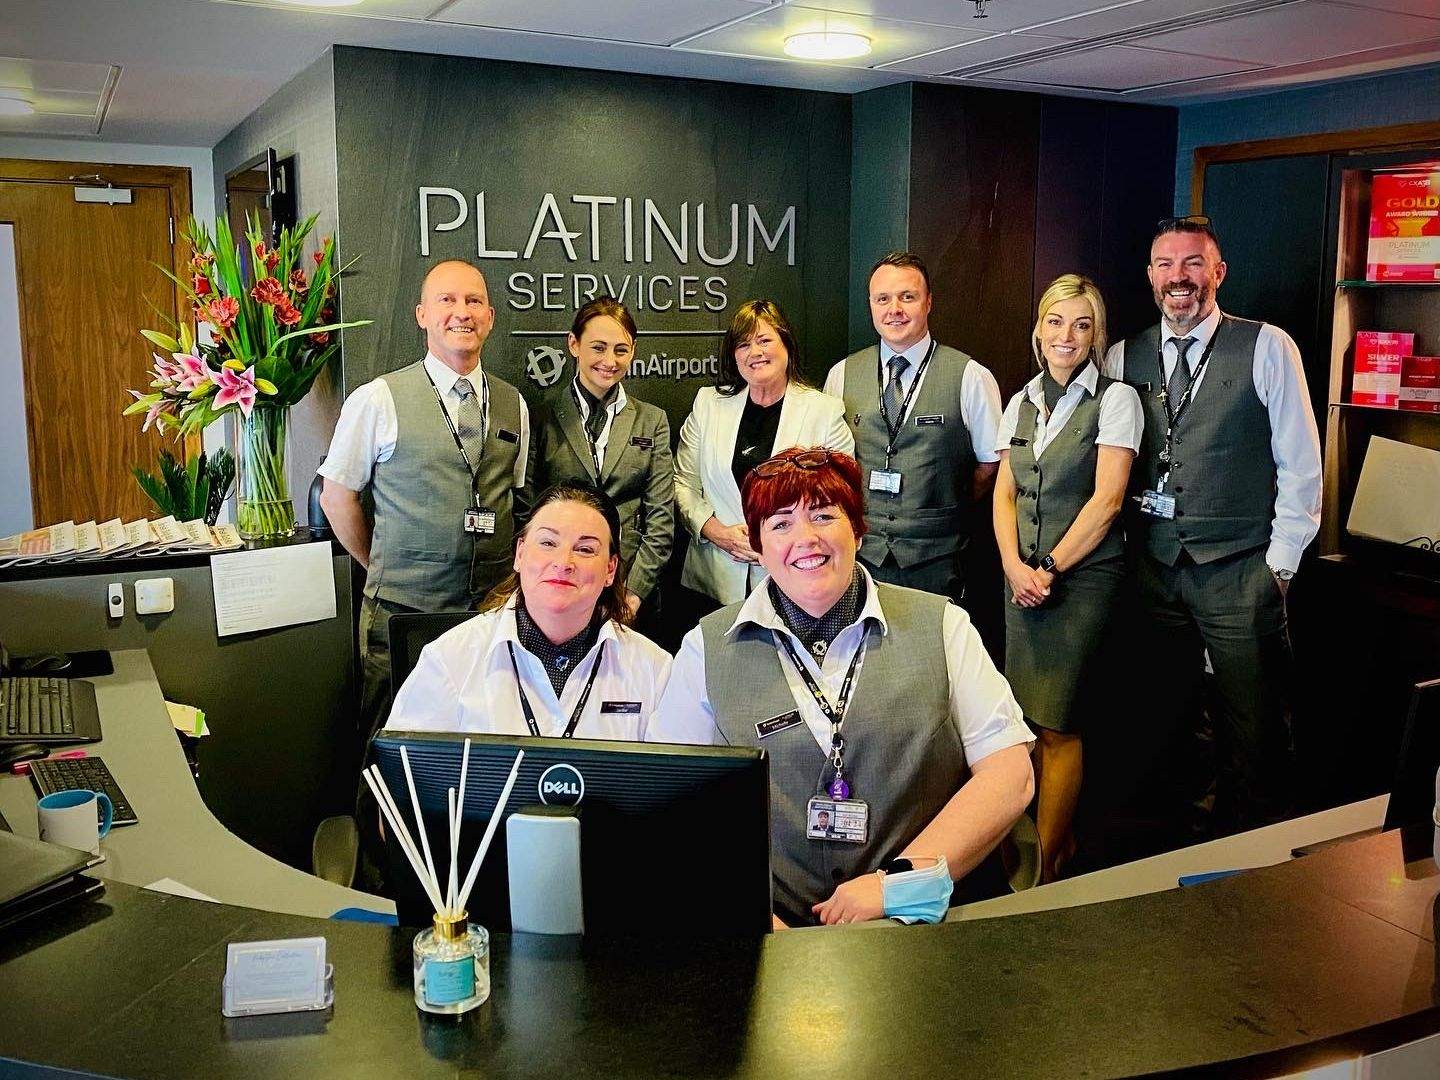 VIP lounge, Platinum Services, Dublin Airport - since May 2022